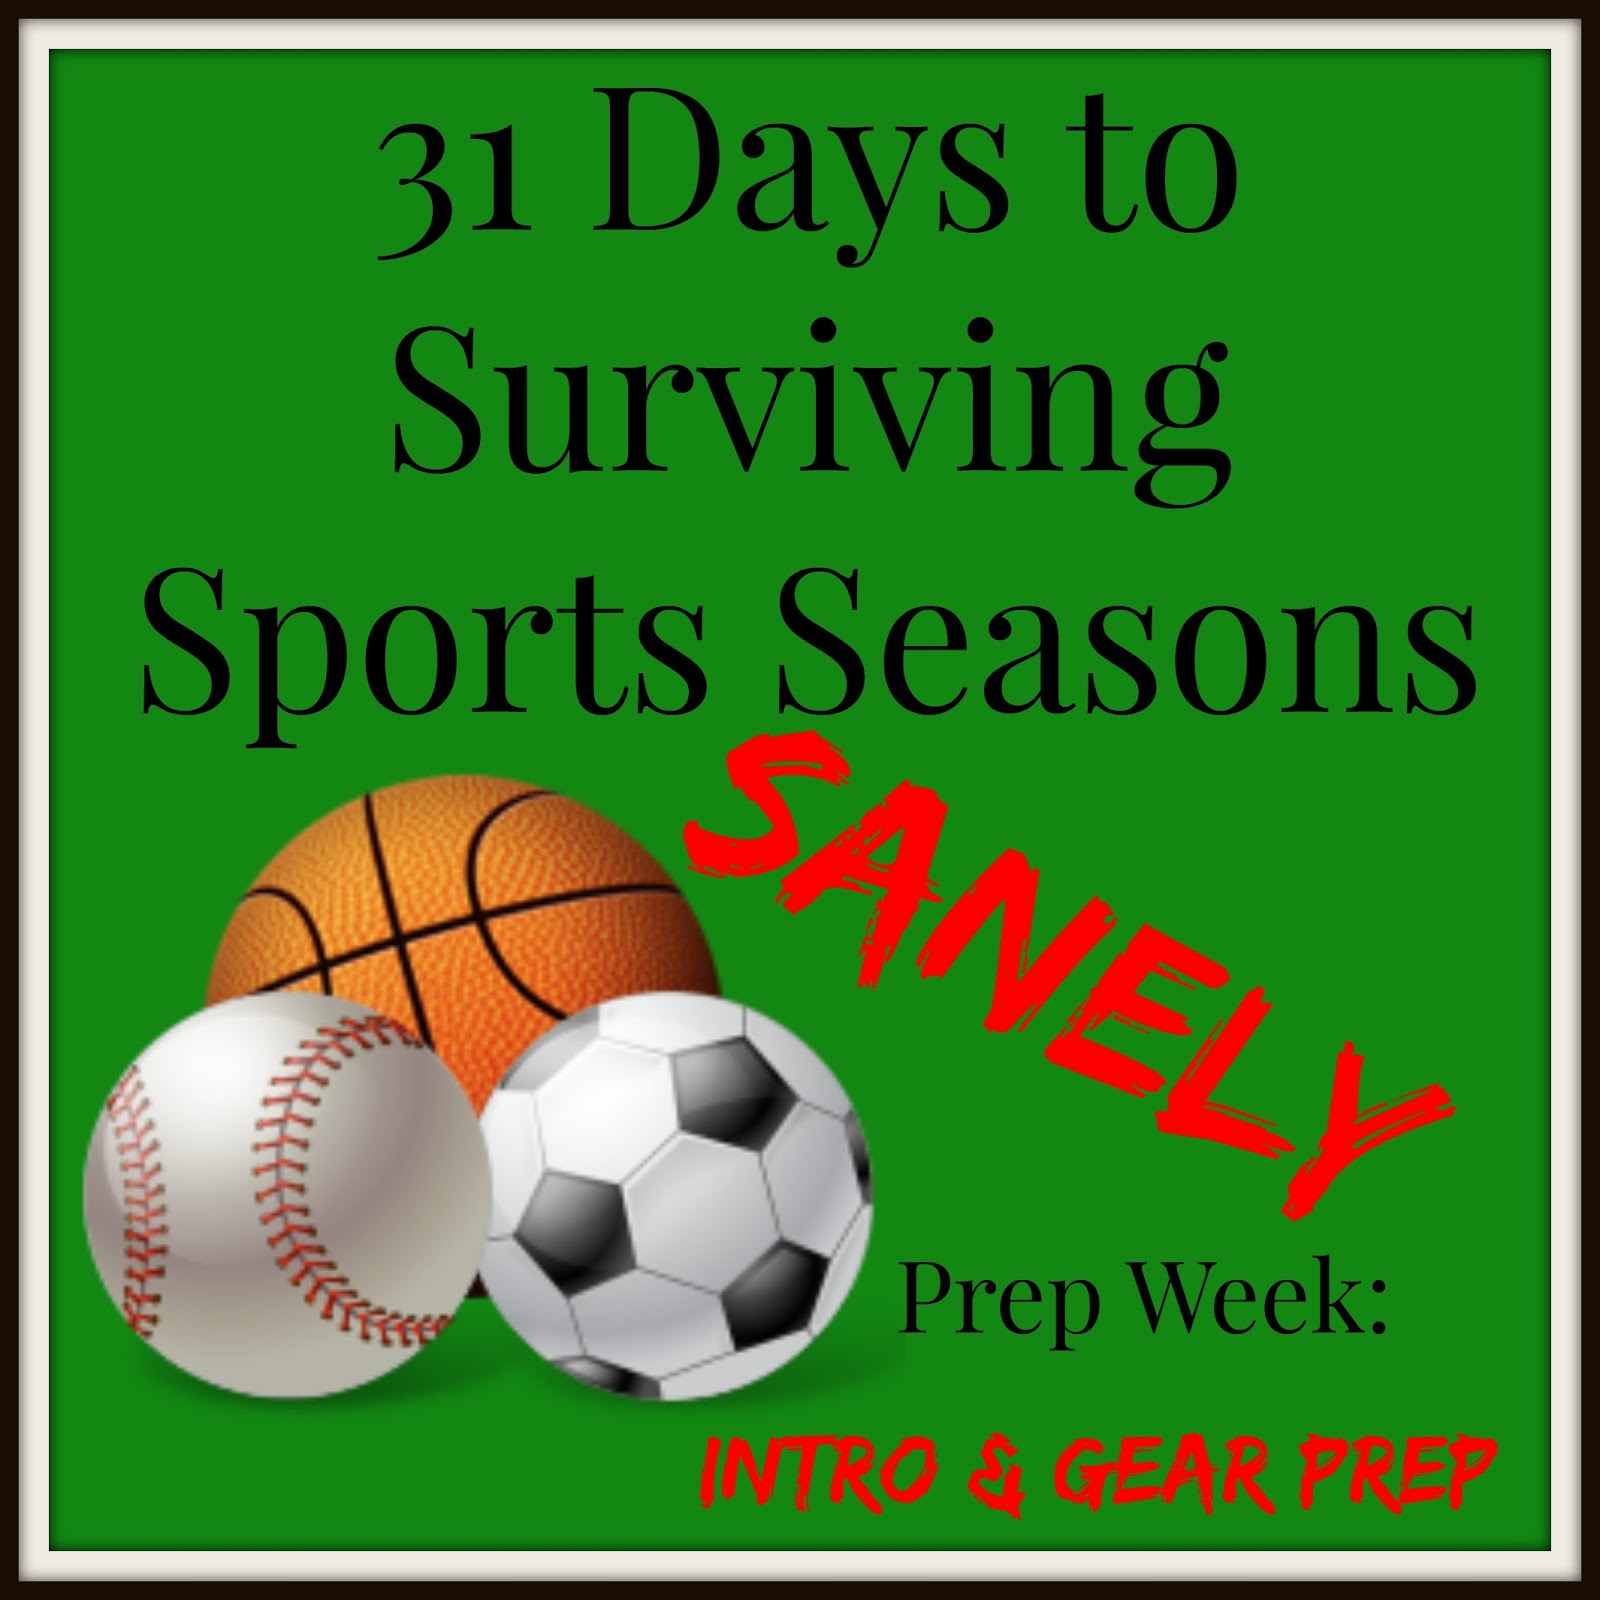 31 Days to Surviving Sports Seasons Sanely:Intro and Gear Prep